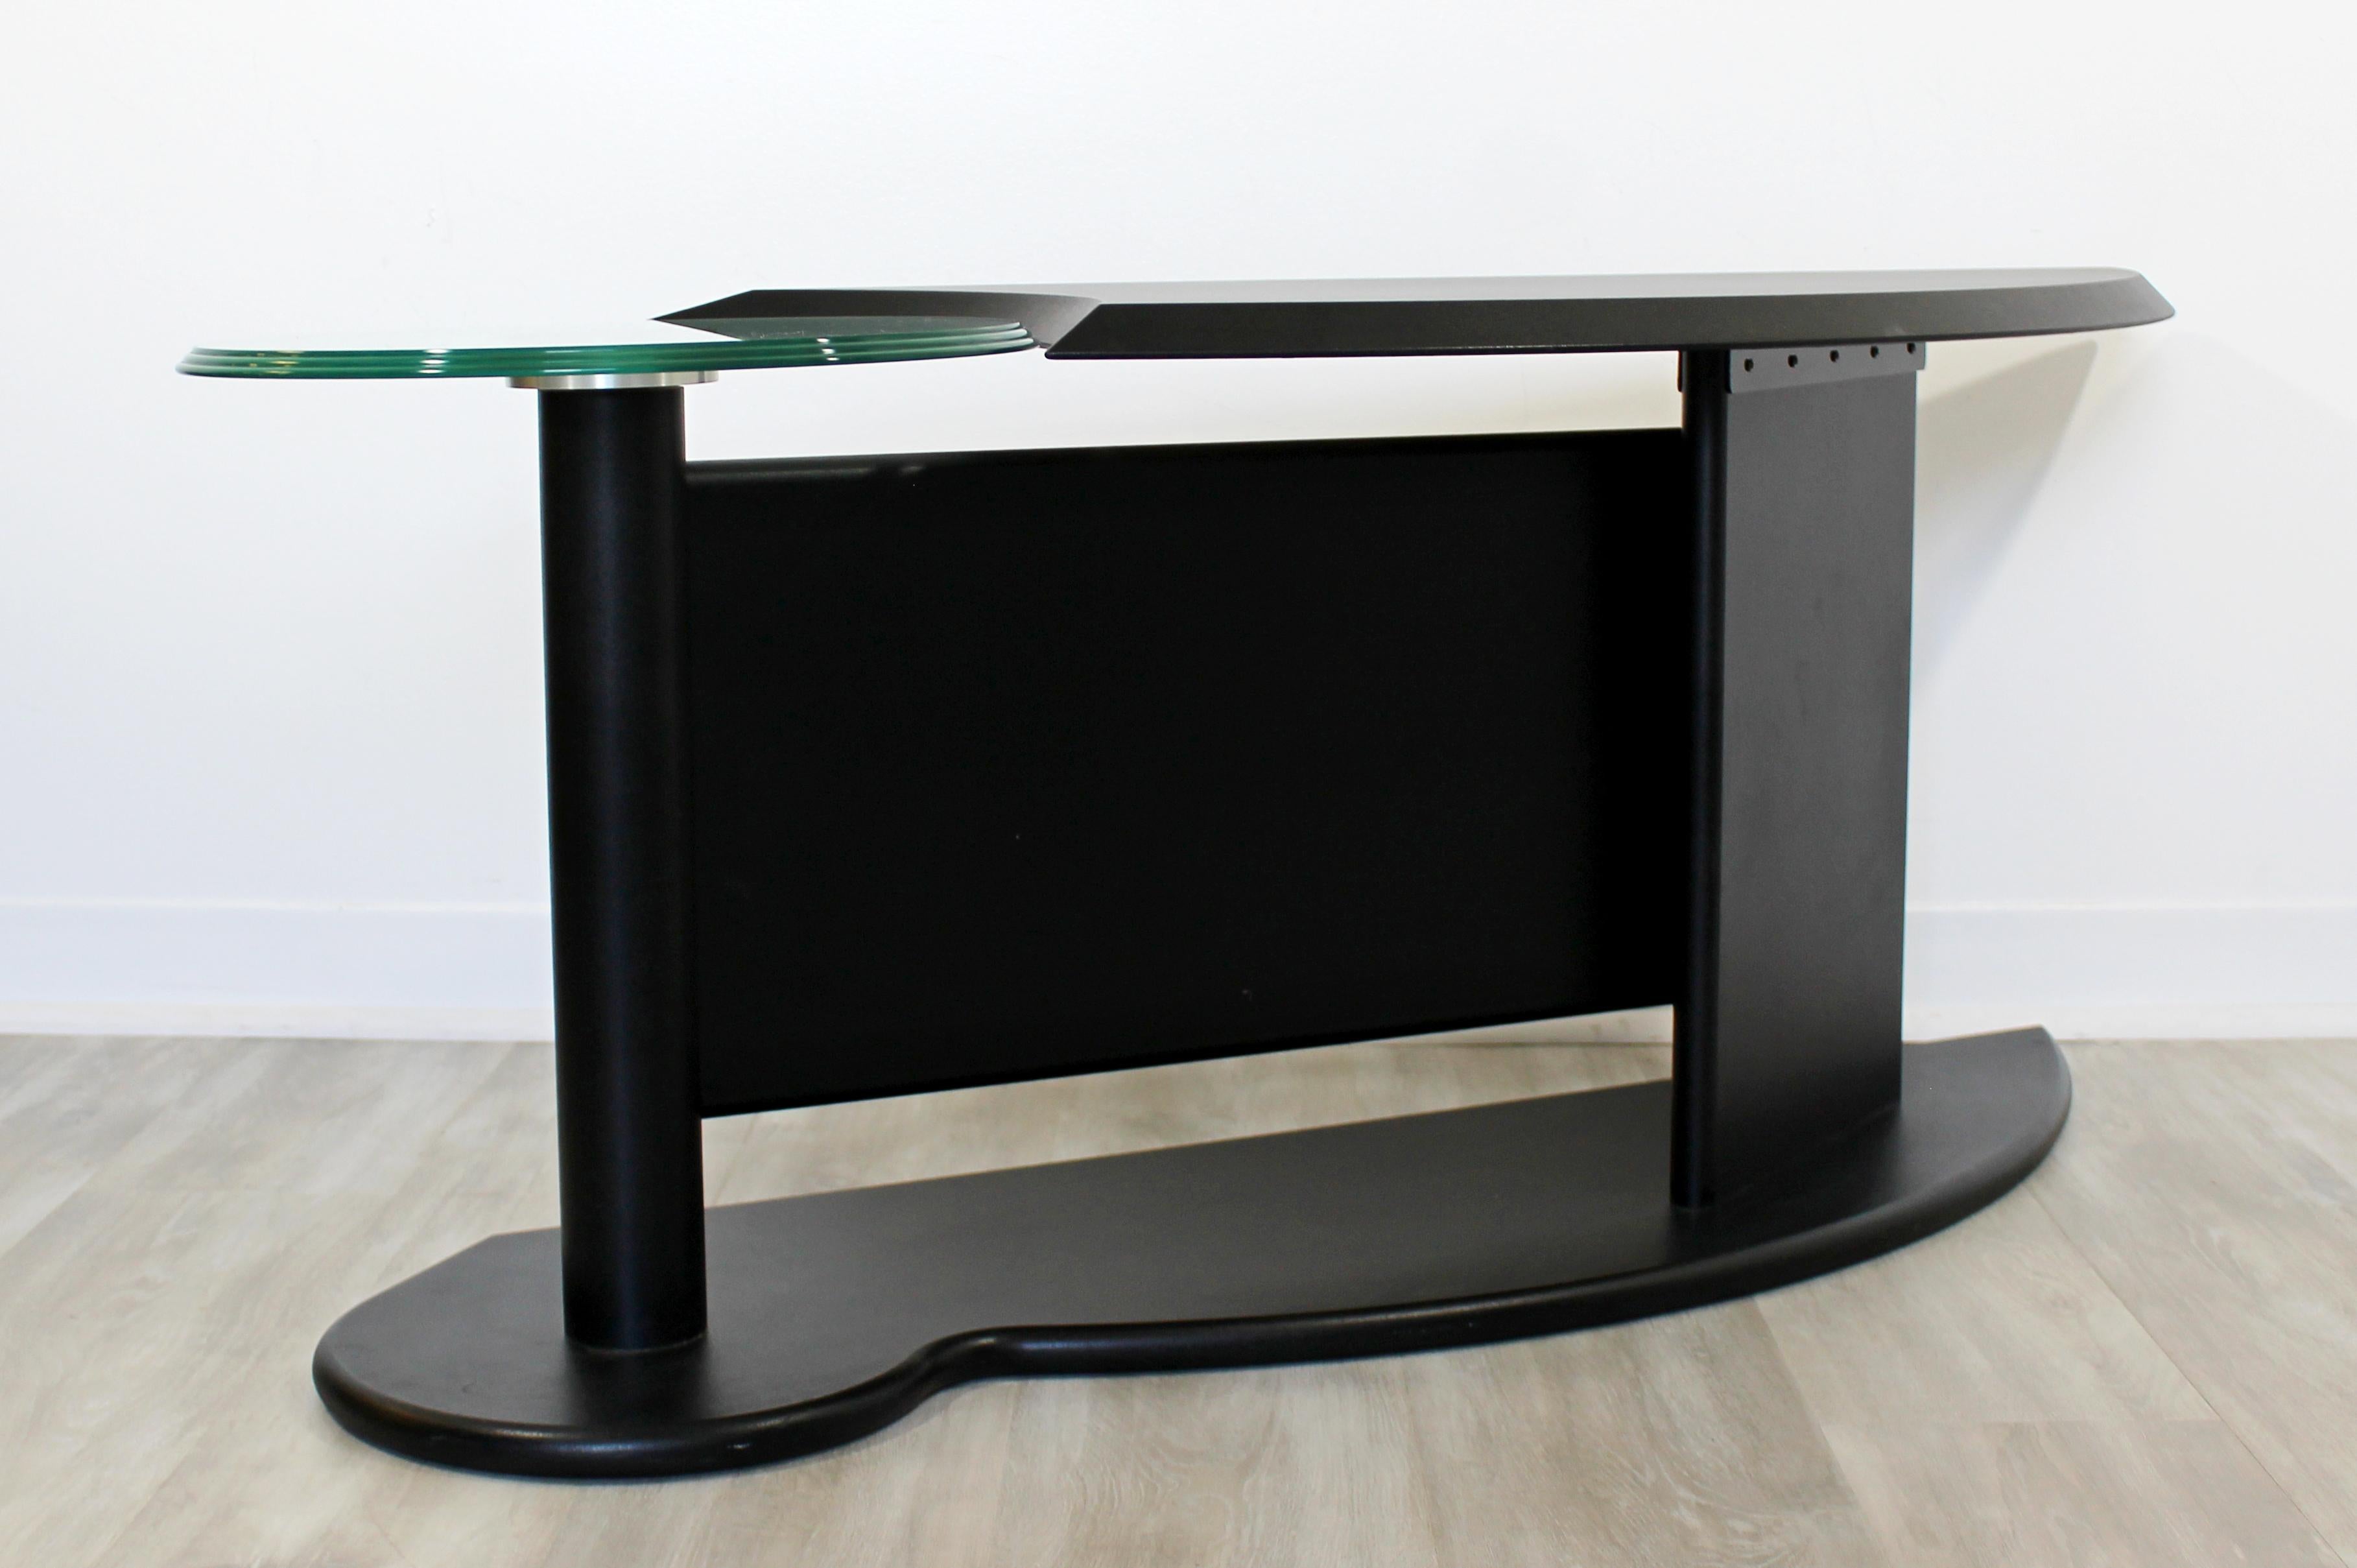 For your consideration is a marvelous, asymmetrical, glass topped, low console or accent table by Cassina Italy. In very good condition. The dimensions are 52.5